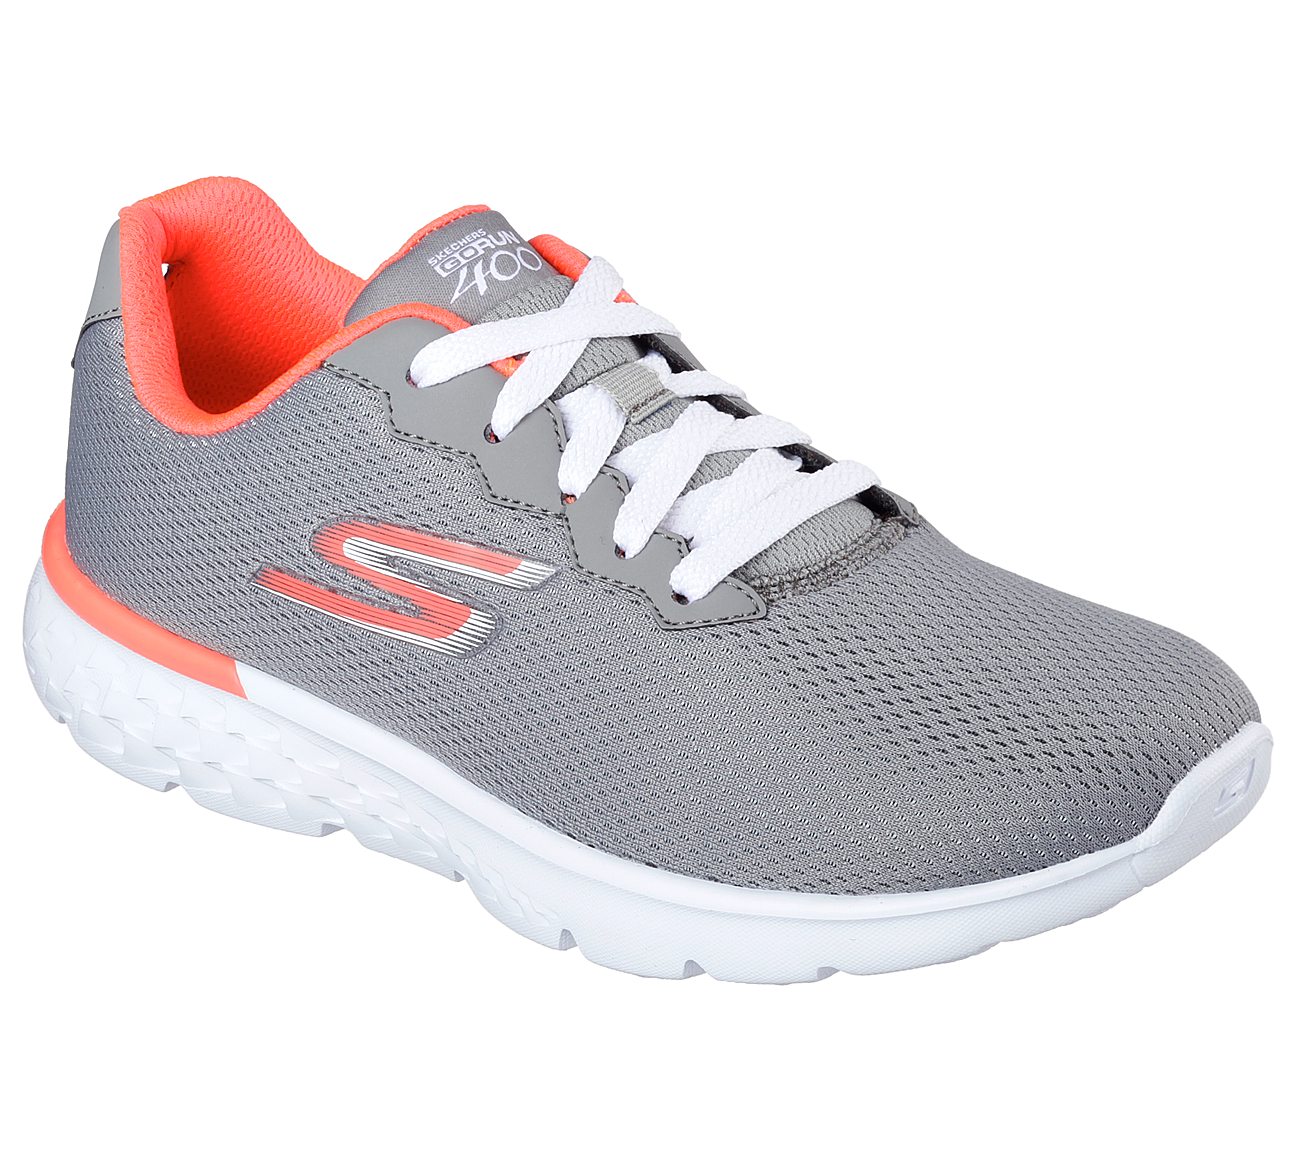 GO RUN 400 - ACTION, GREY/CORAL Footwear Lateral View